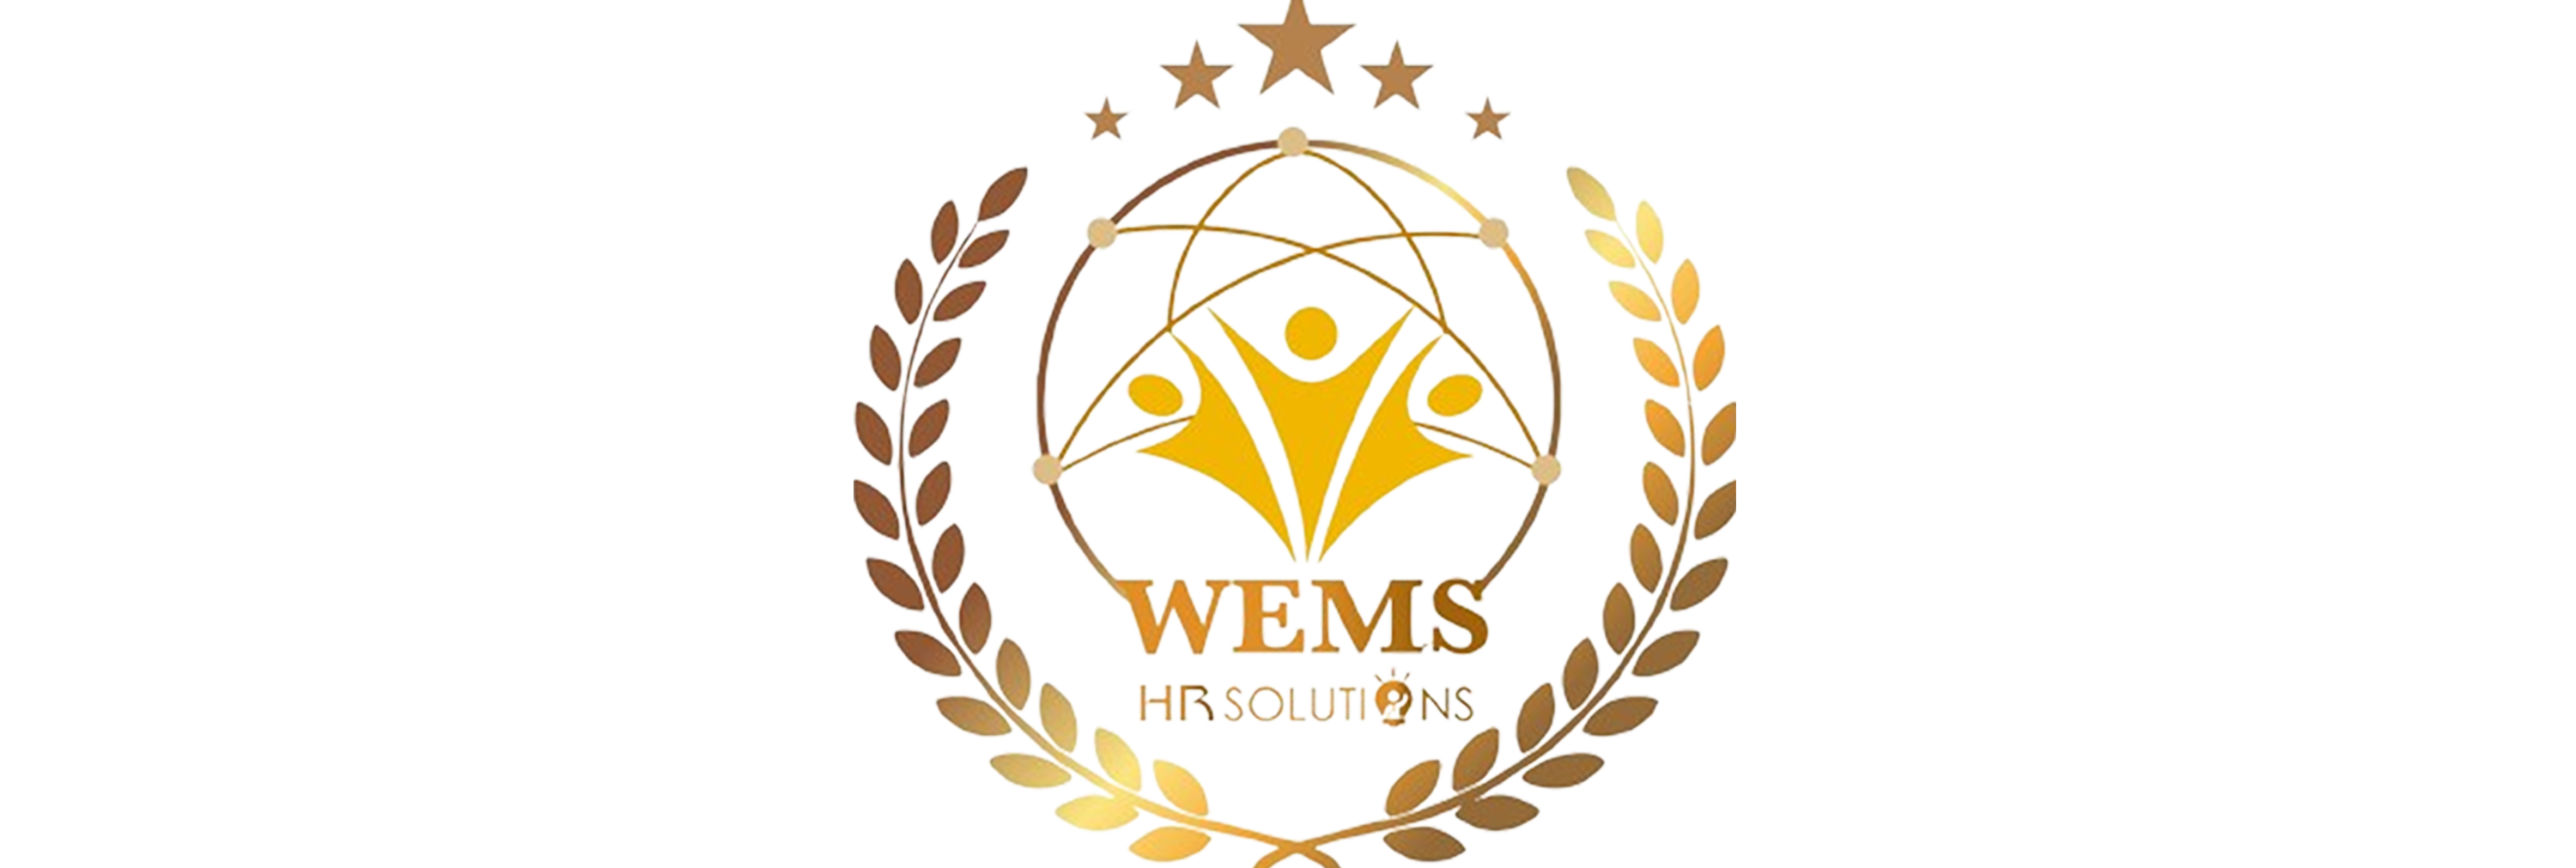 WEMS HR SOLUTIONS